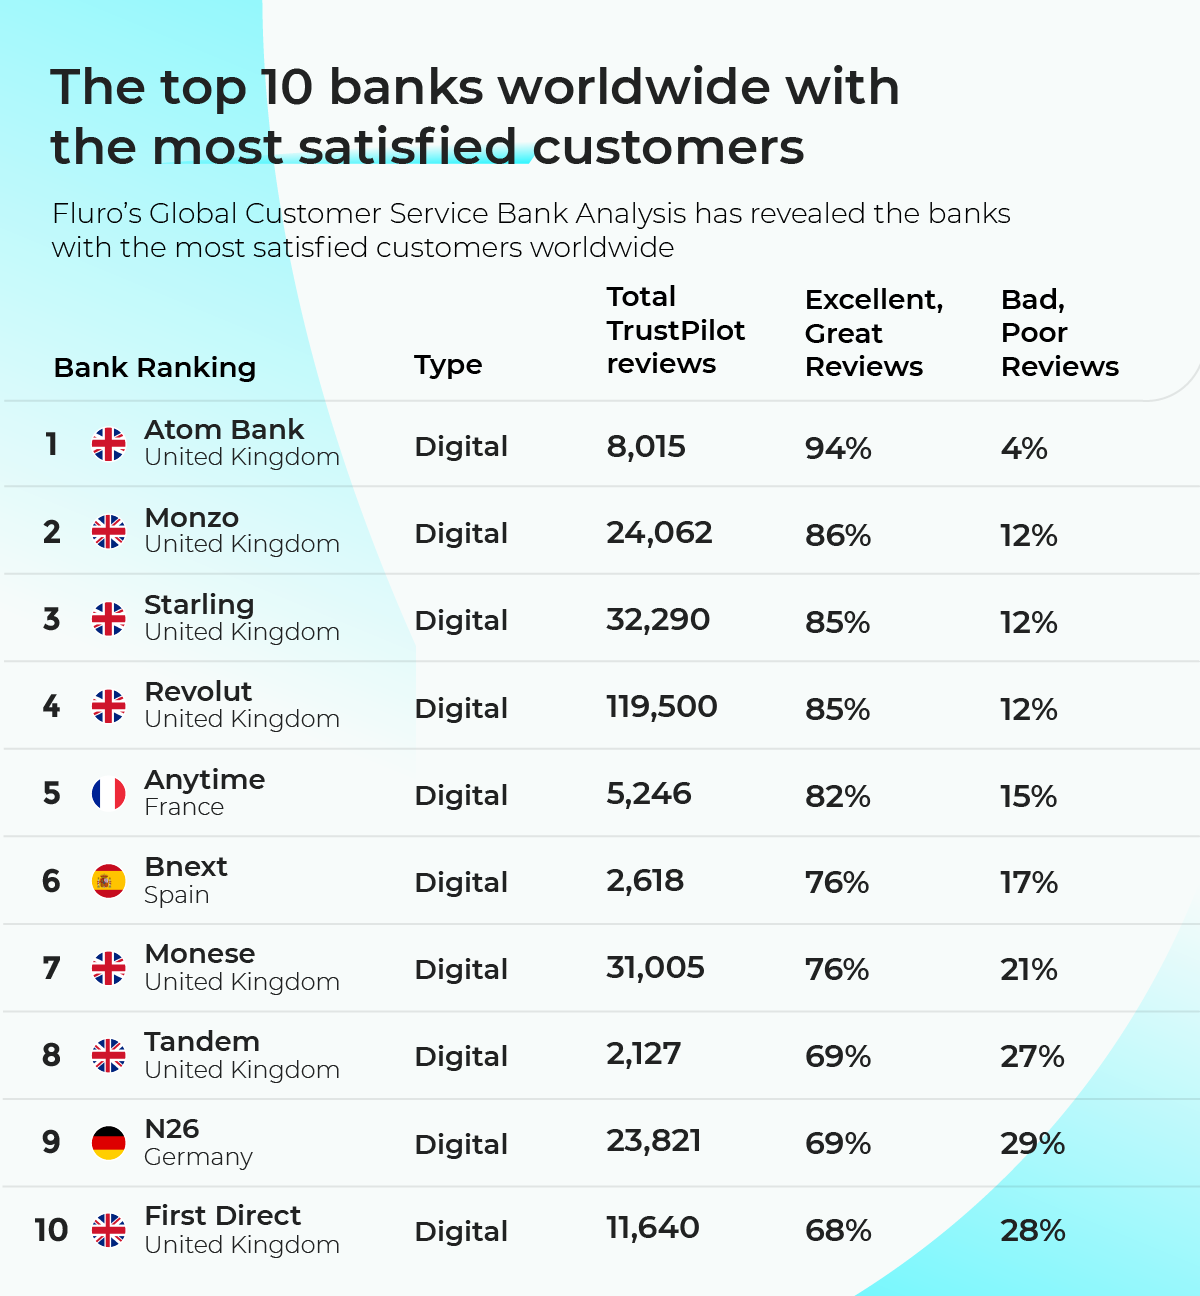 The top banks worldwide with the most satisfied customers